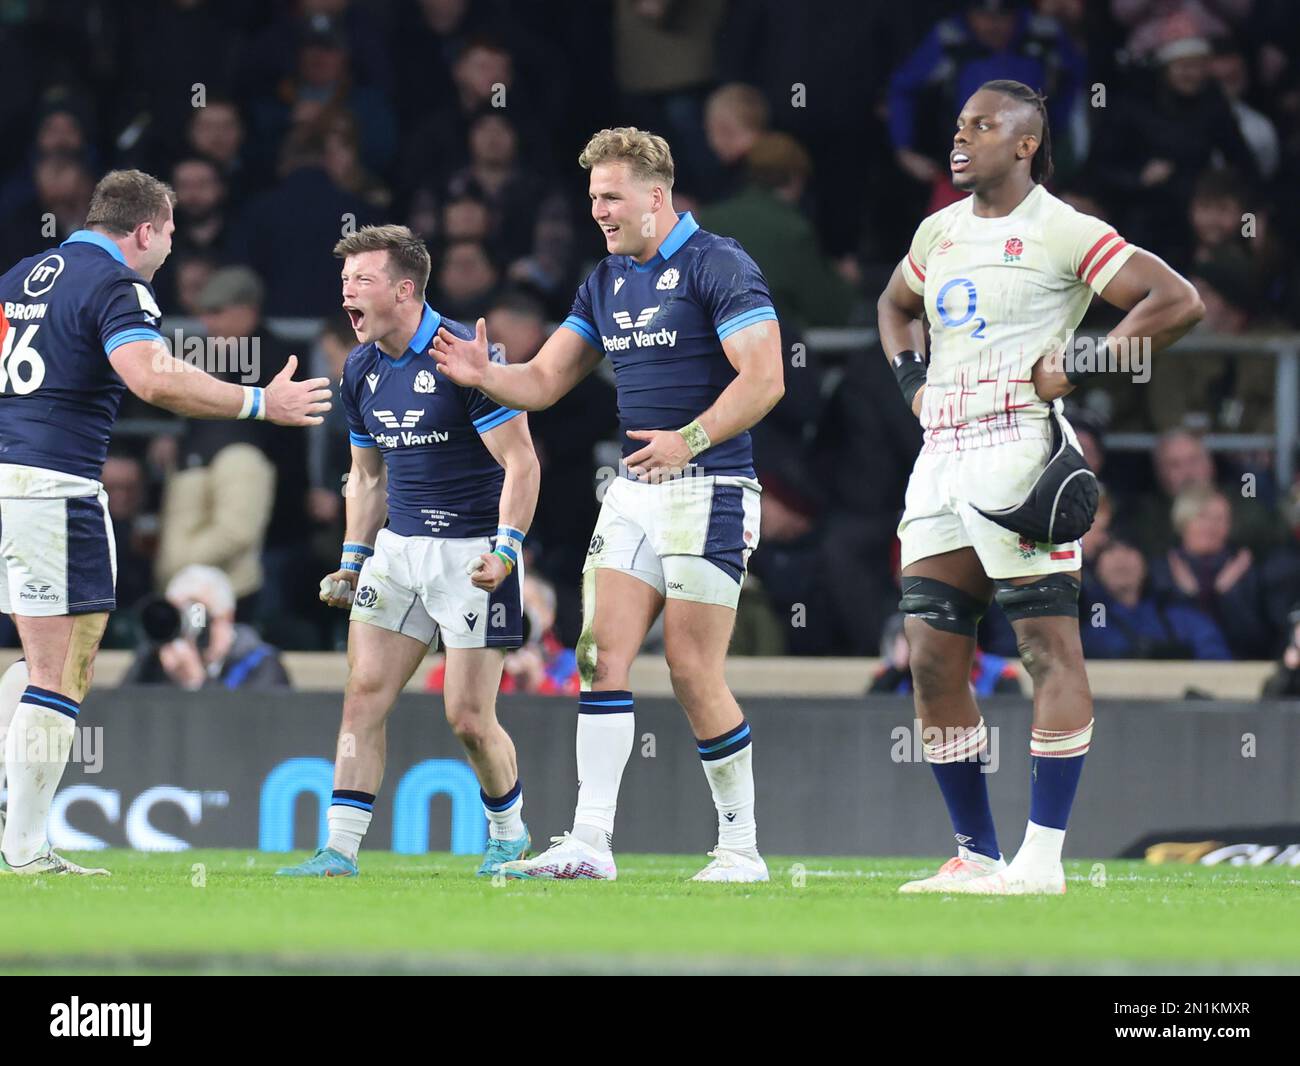 L-R George Horne of Scotland (MIDDLE) AND DEJECTED E4 during the Guinness Six Nations Calcutta Cup match between England and Scotland at Twickenham Stock Photo